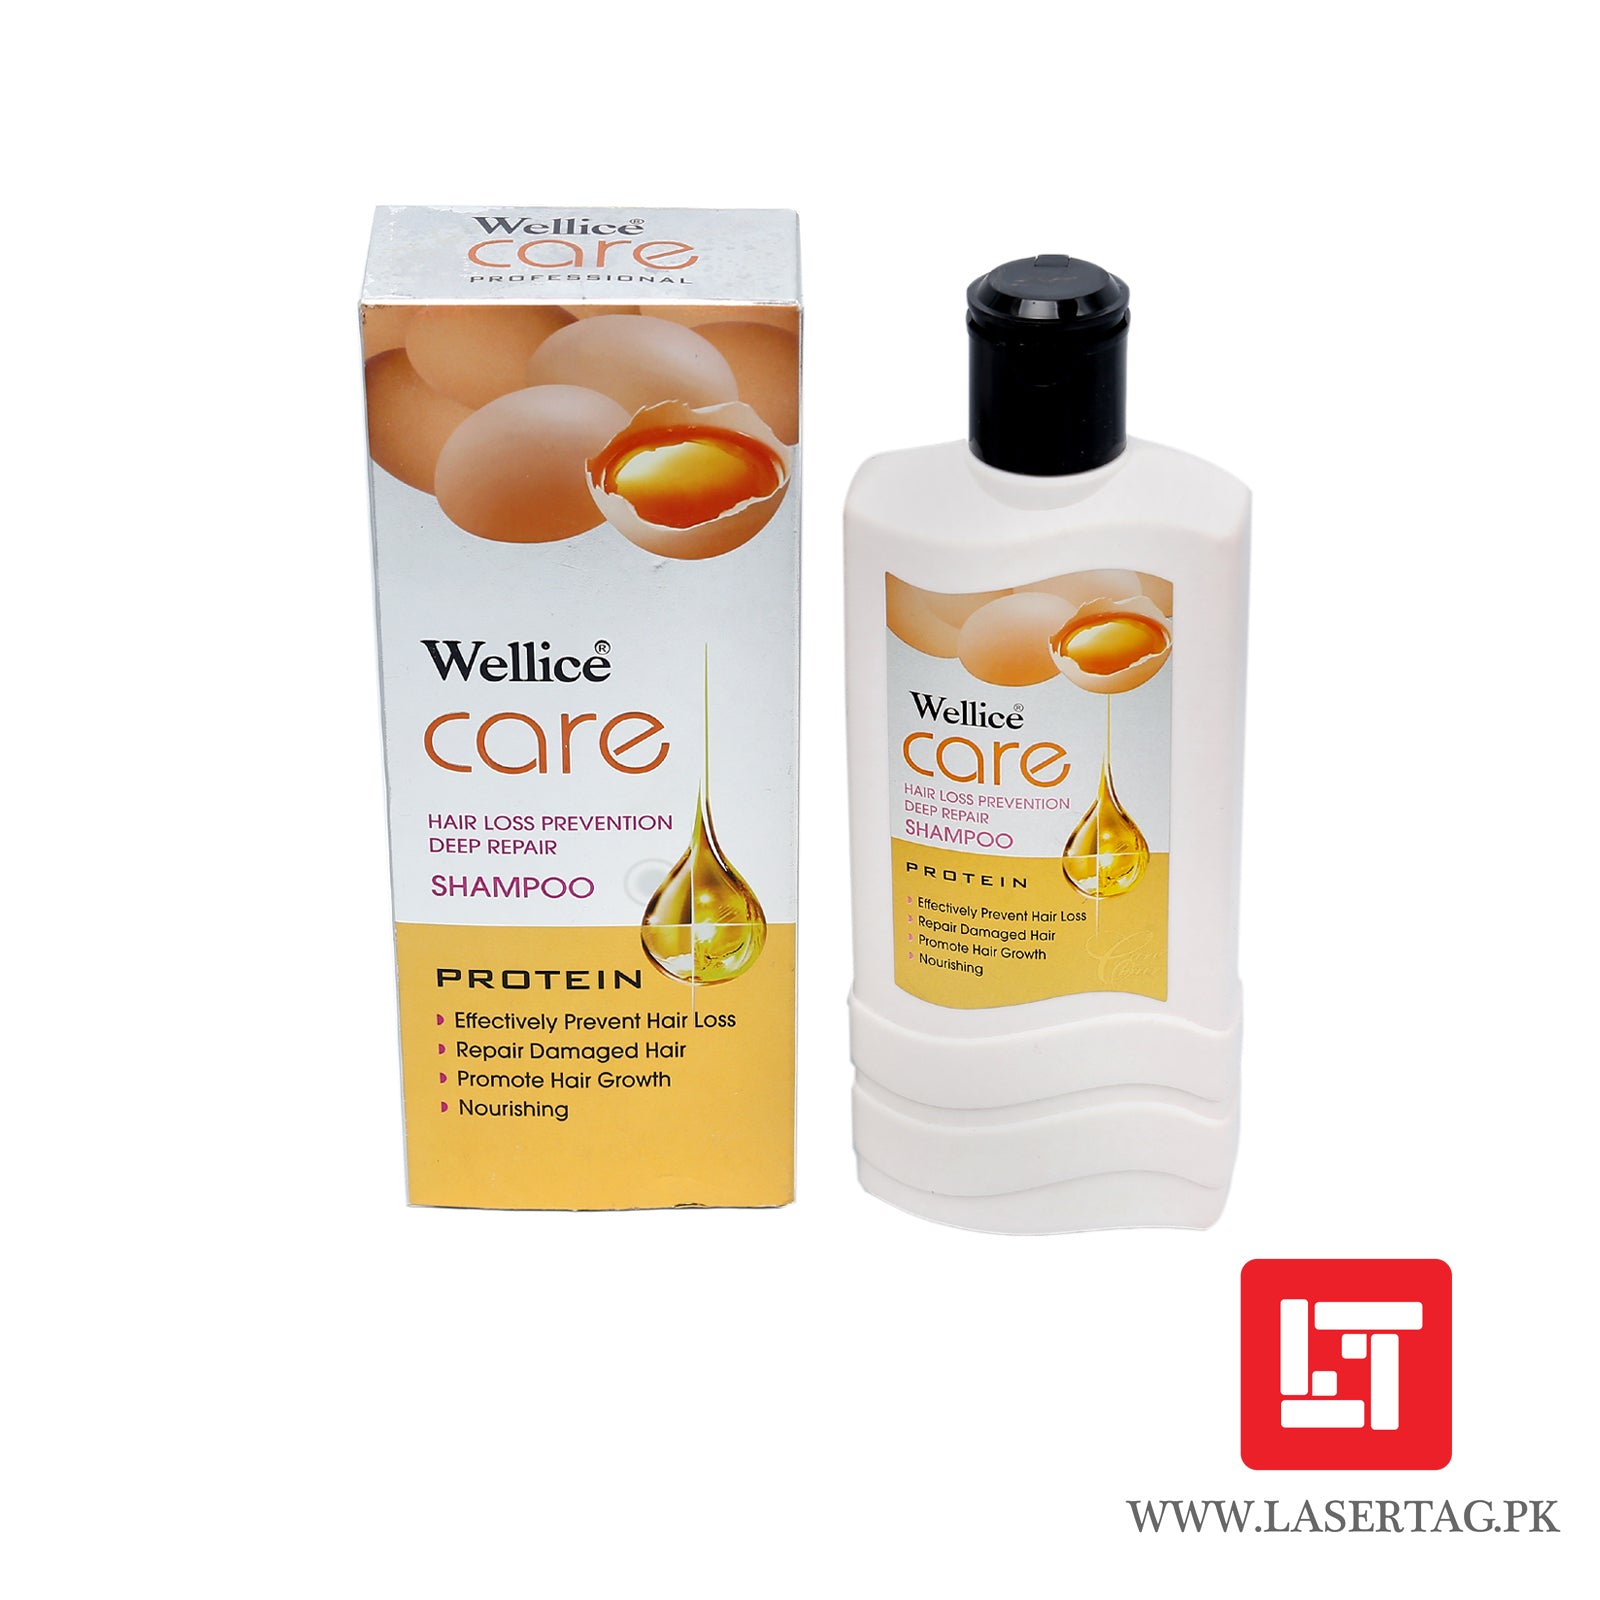 Wellice 3in1 Double Care Soft Nourishing Shampoo For Smooth Repair Hair With Egg 400g freeshipping - lasertag.pk